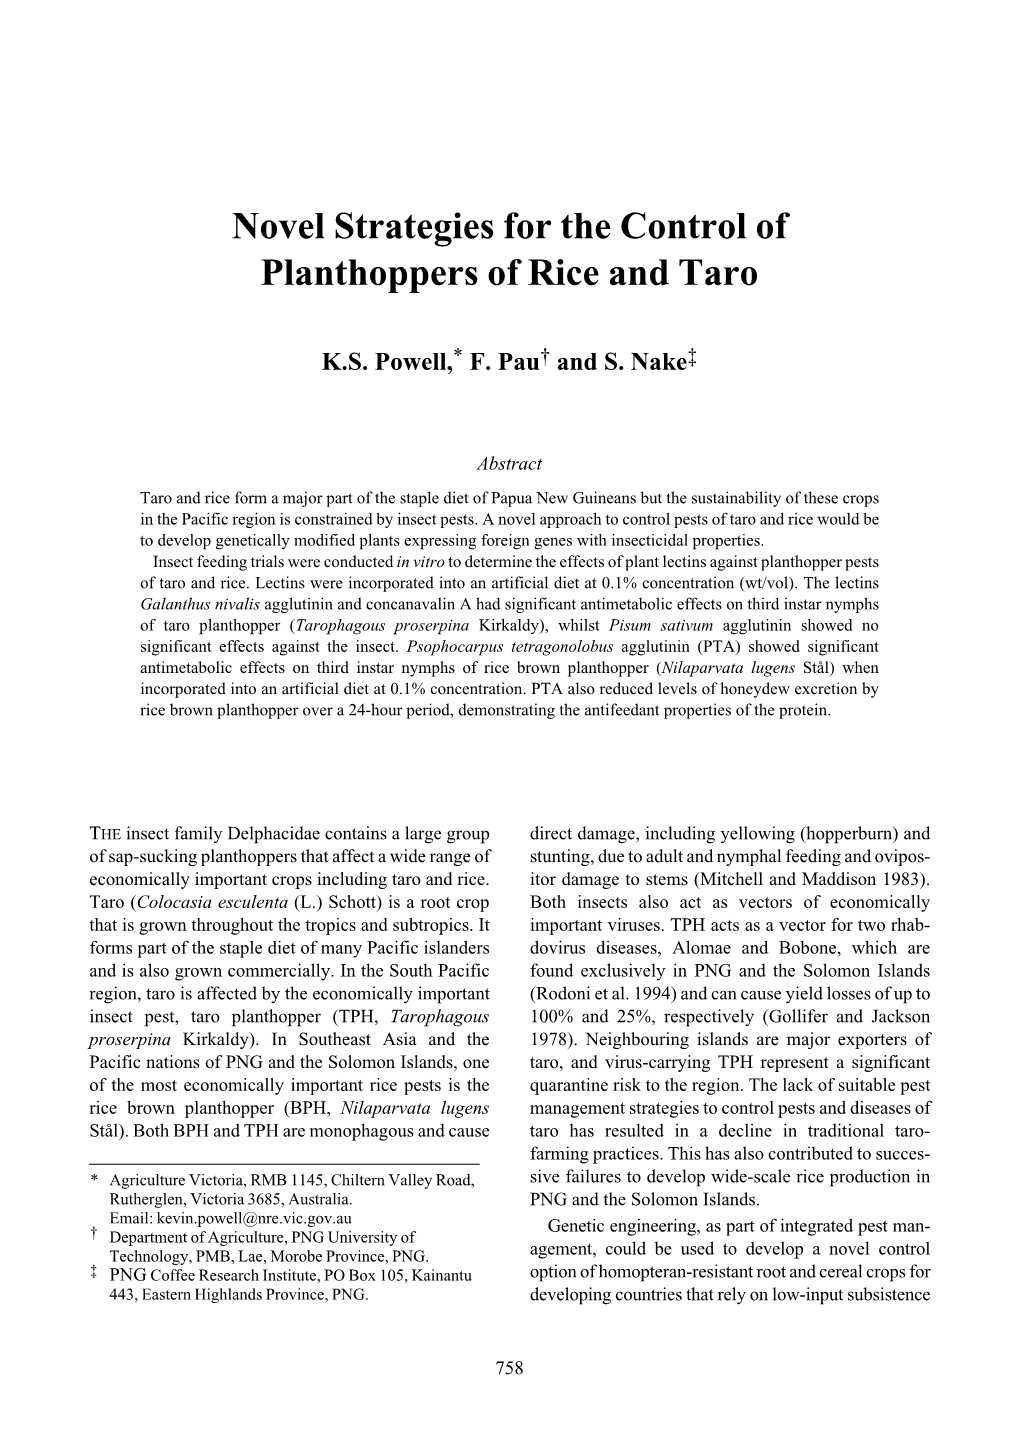 Novel Strategies for the Control of Planthoppers of Rice and Taro